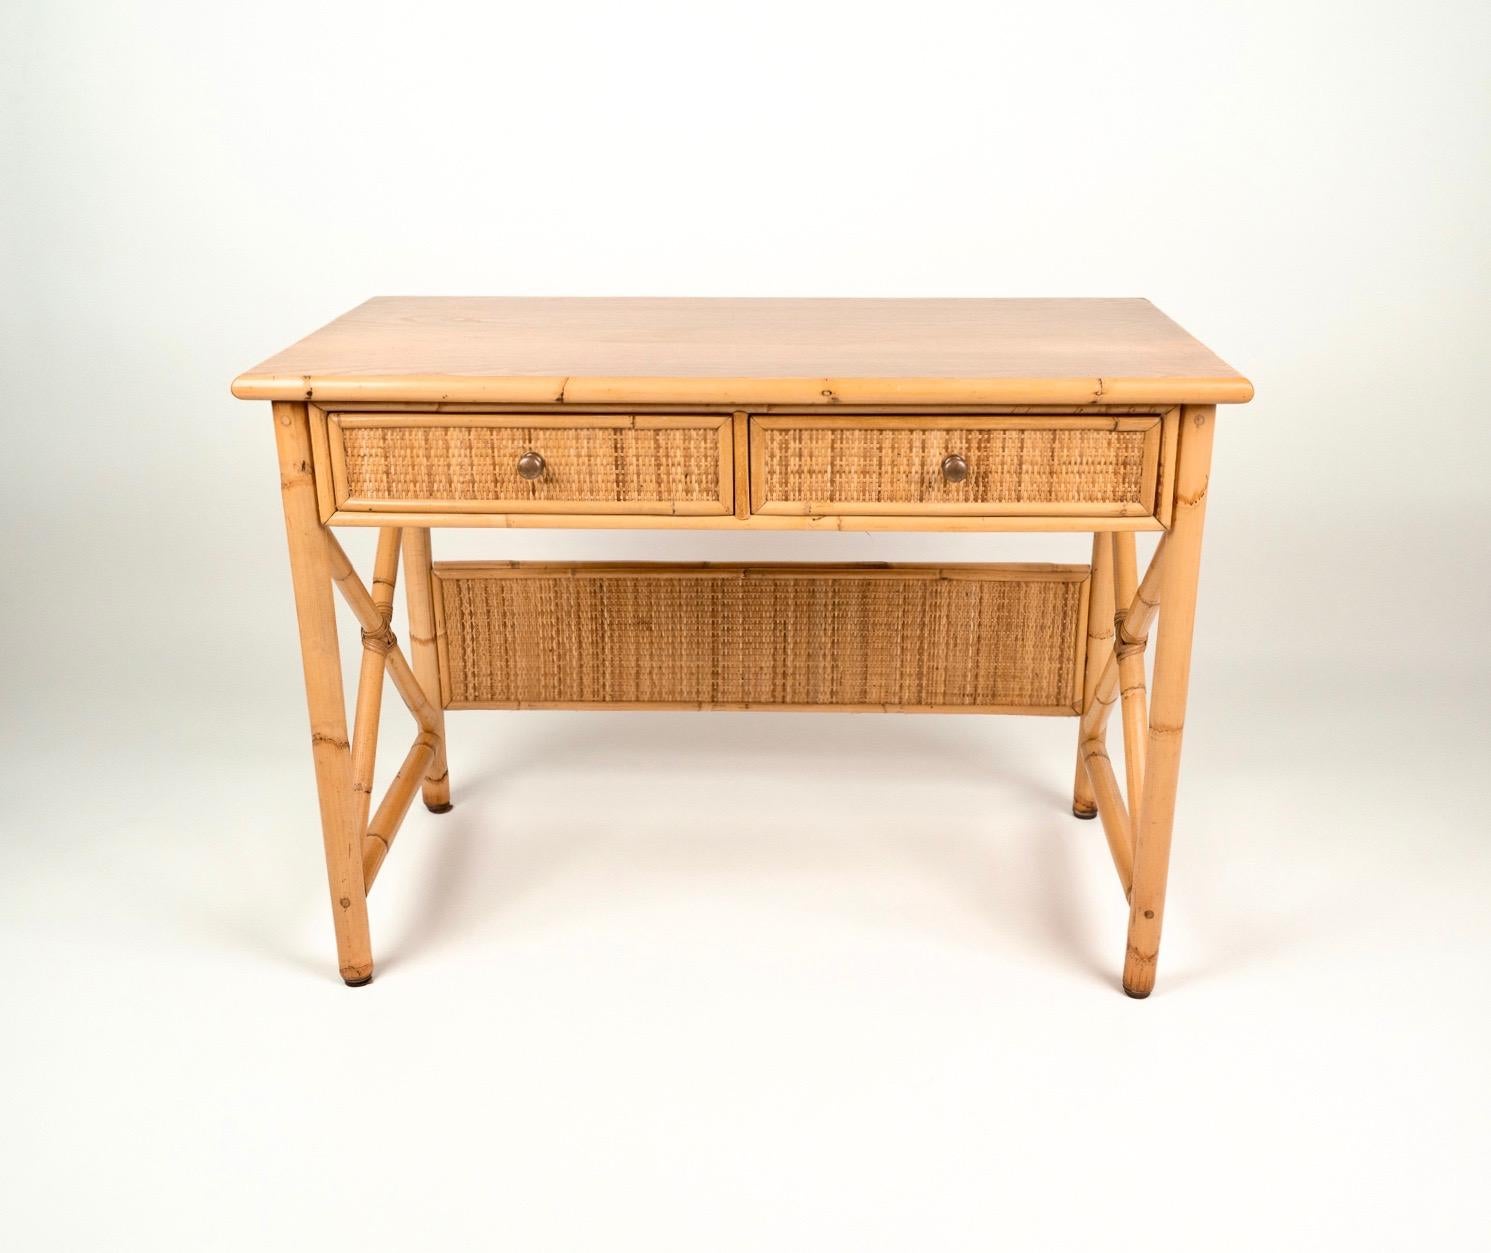 Italian Mid-Century Bamboo, Rattan and Wood Writing Table Desk with Drawers, Italy 1980s